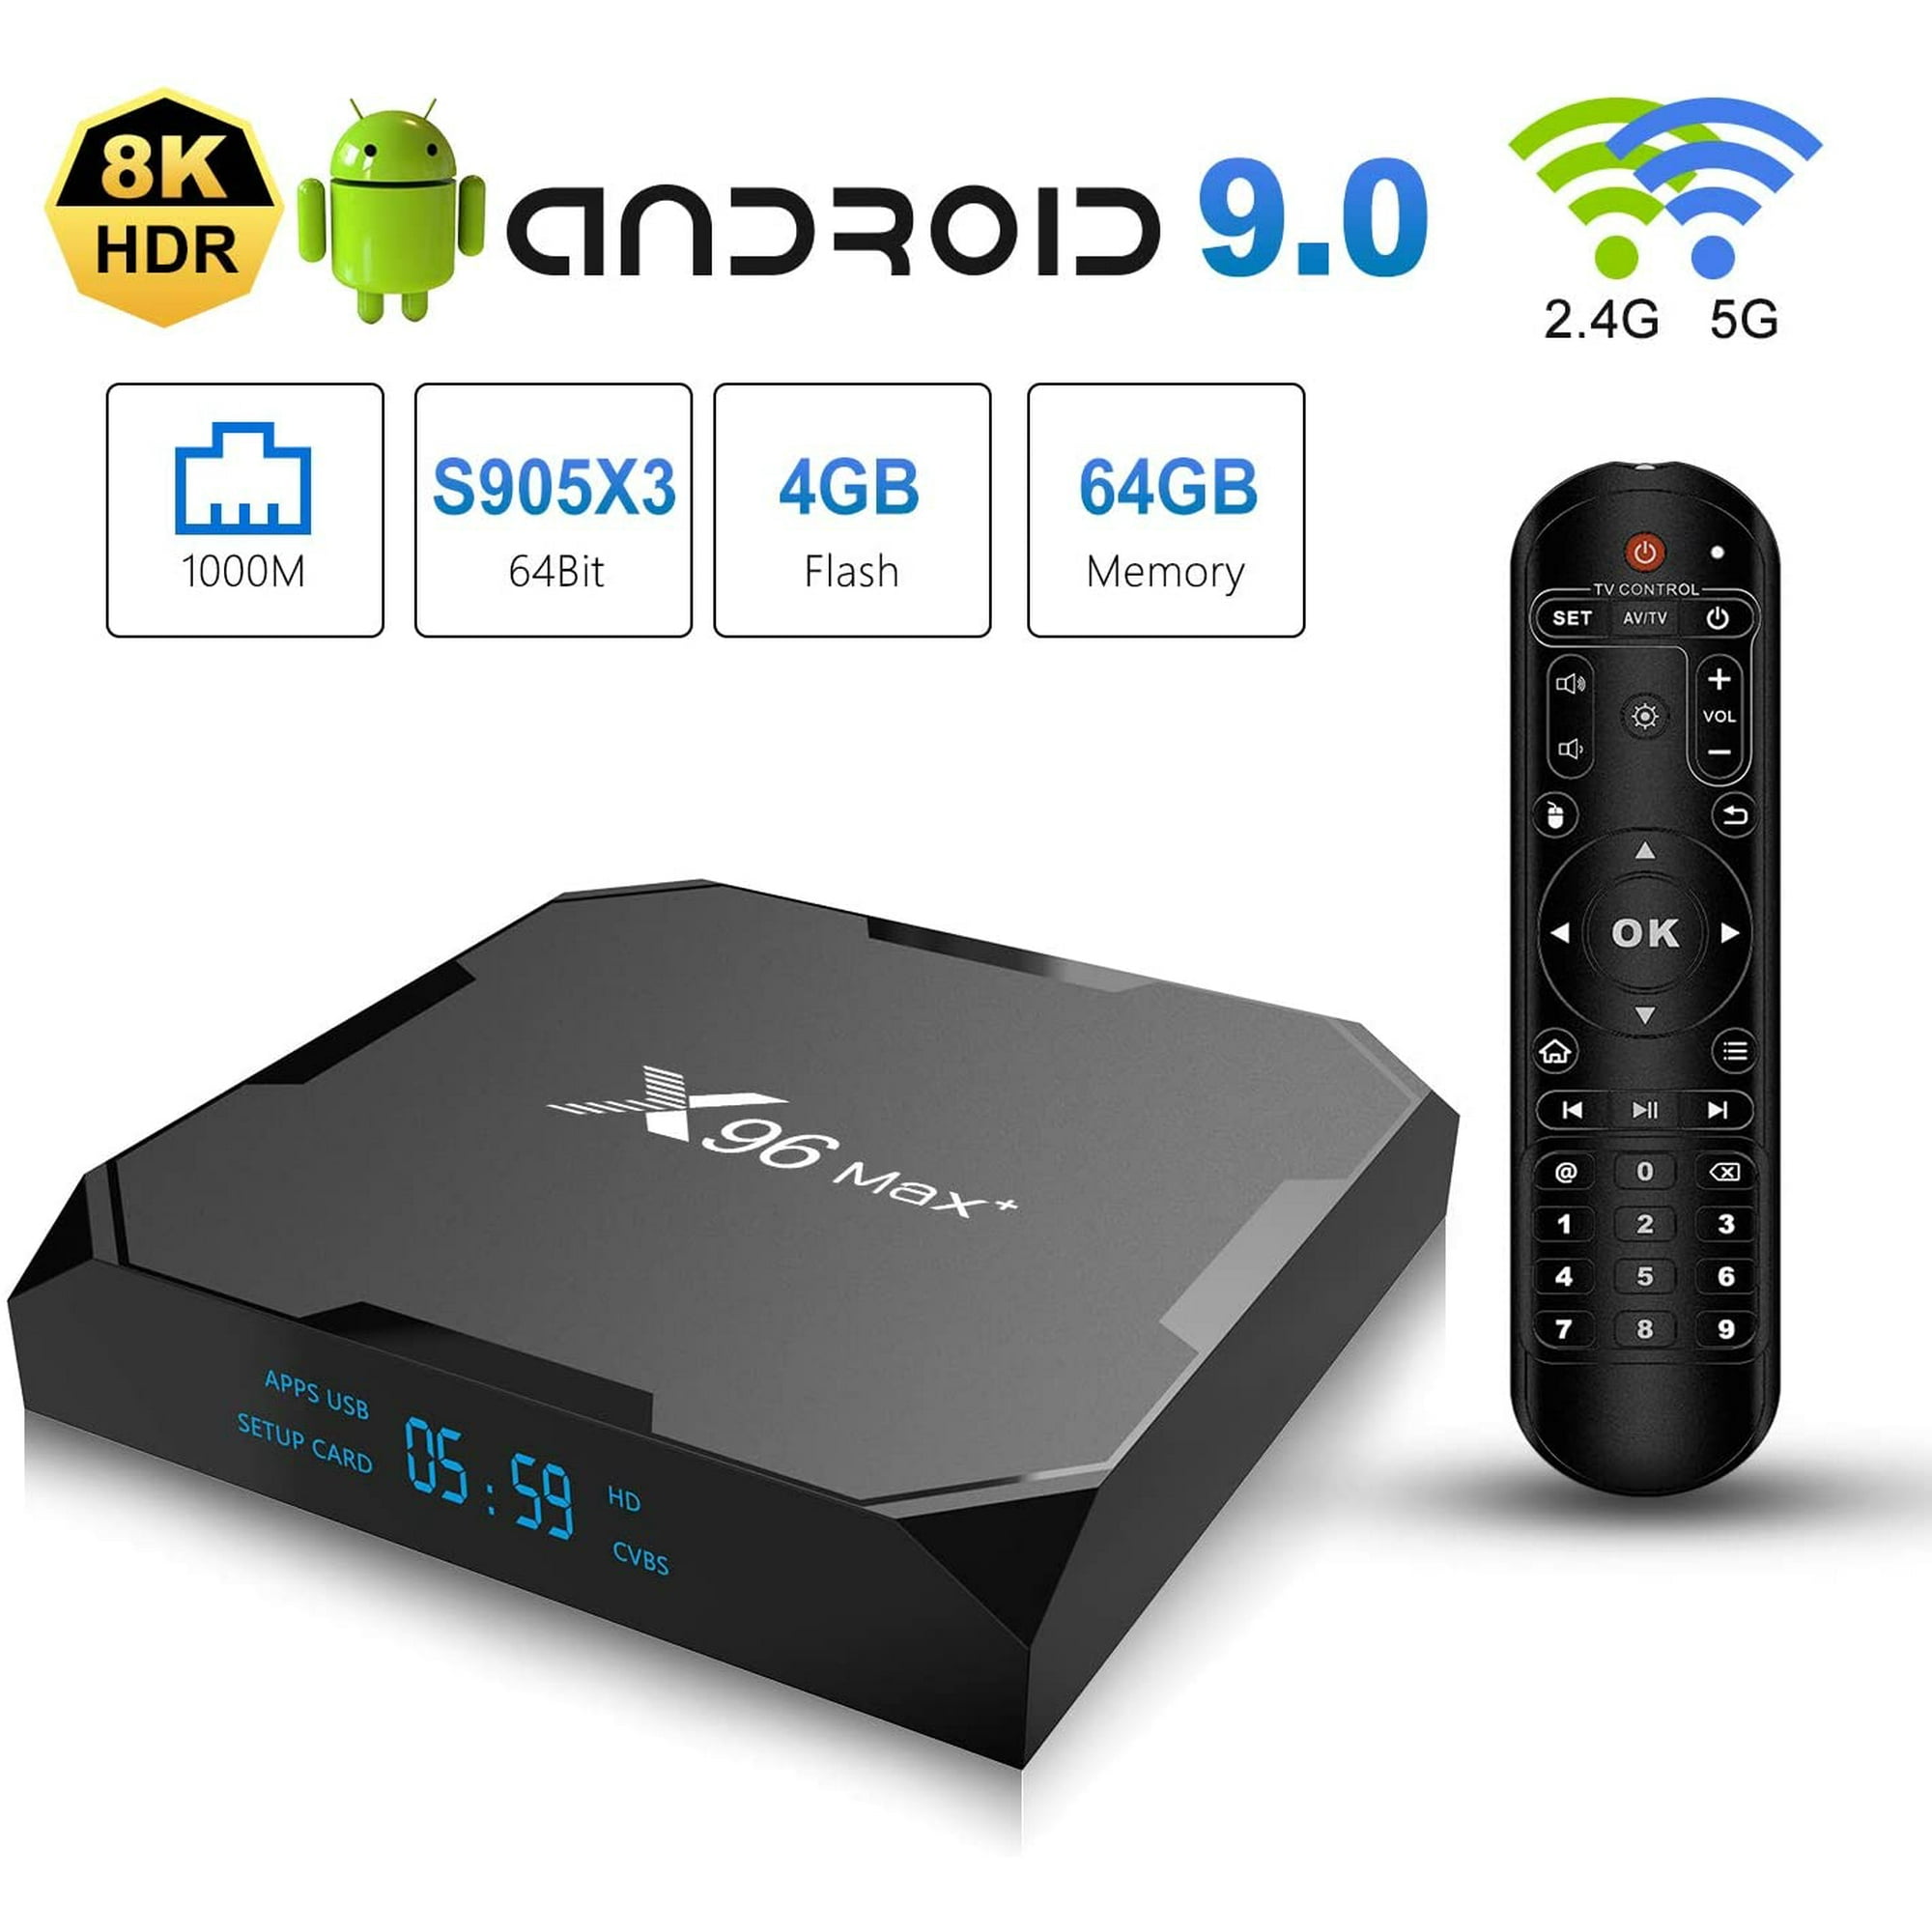 count up wolf Indulge X96 Max Plus Smart TV Box 4G RAM 64G ROM Android 9.0 | Walmart Canada